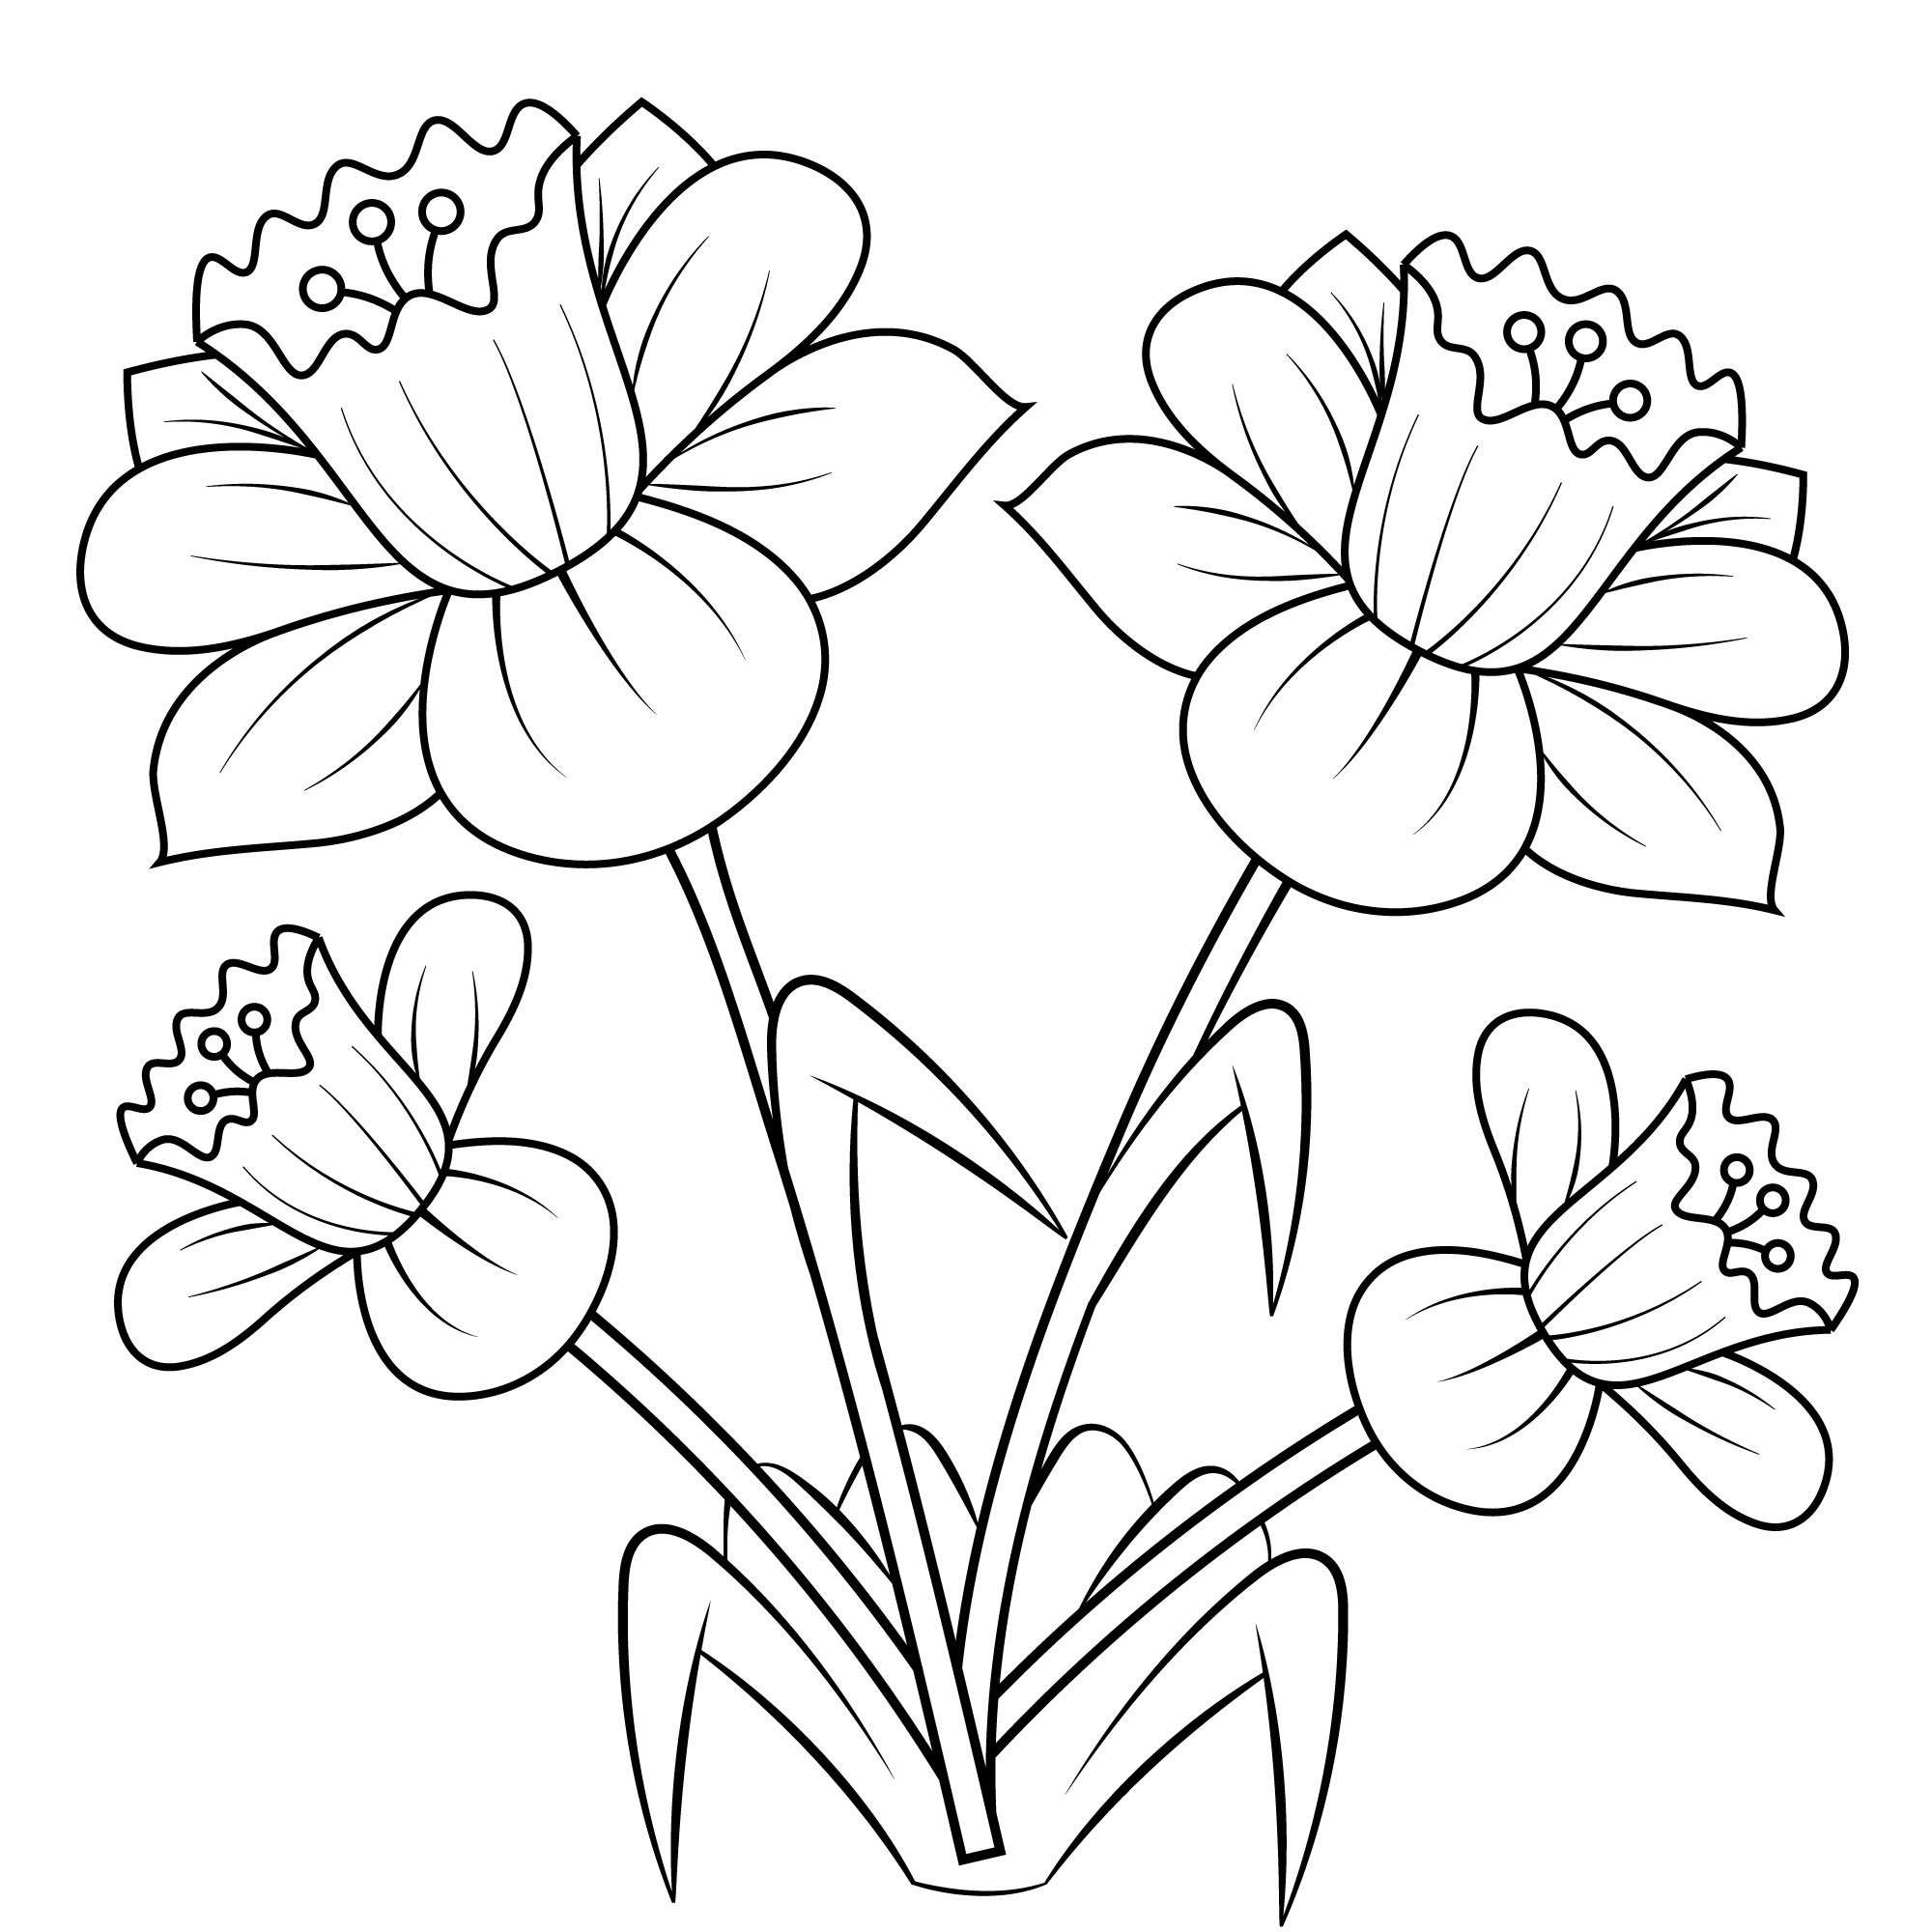 Coloring flower peaceful narcissus